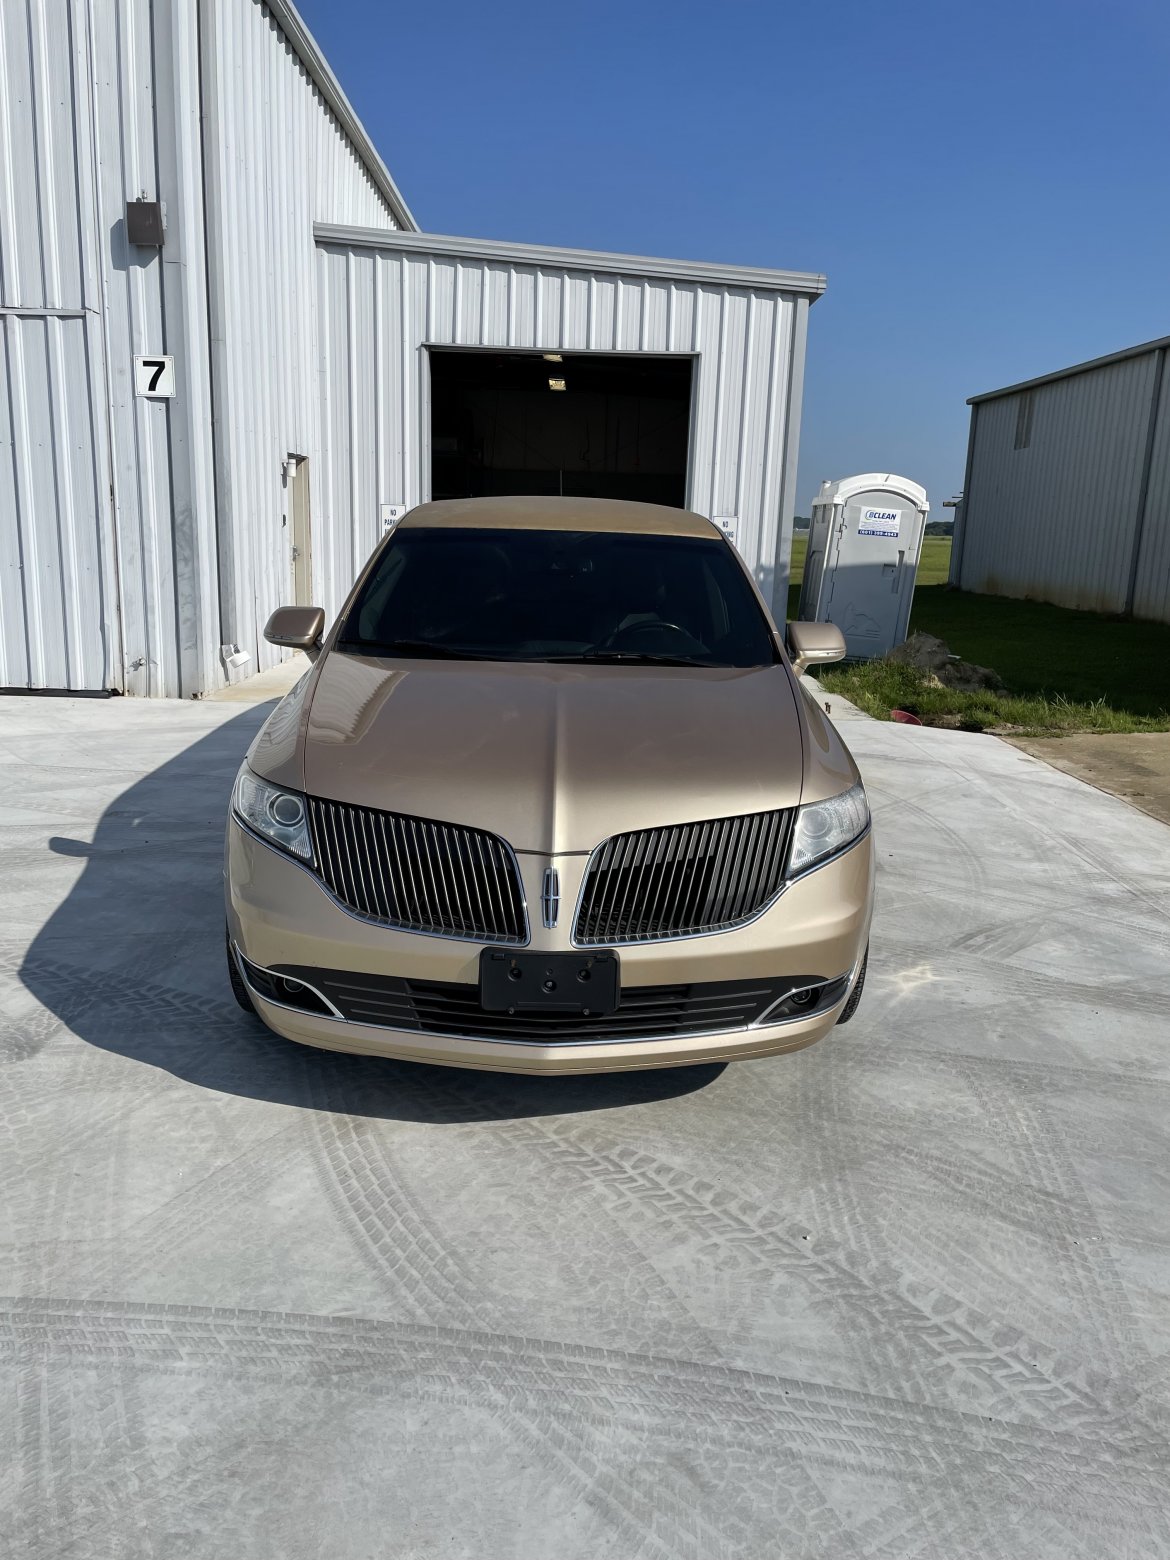 Limousine for sale: 2013 Lincoln MKT by Tiffany